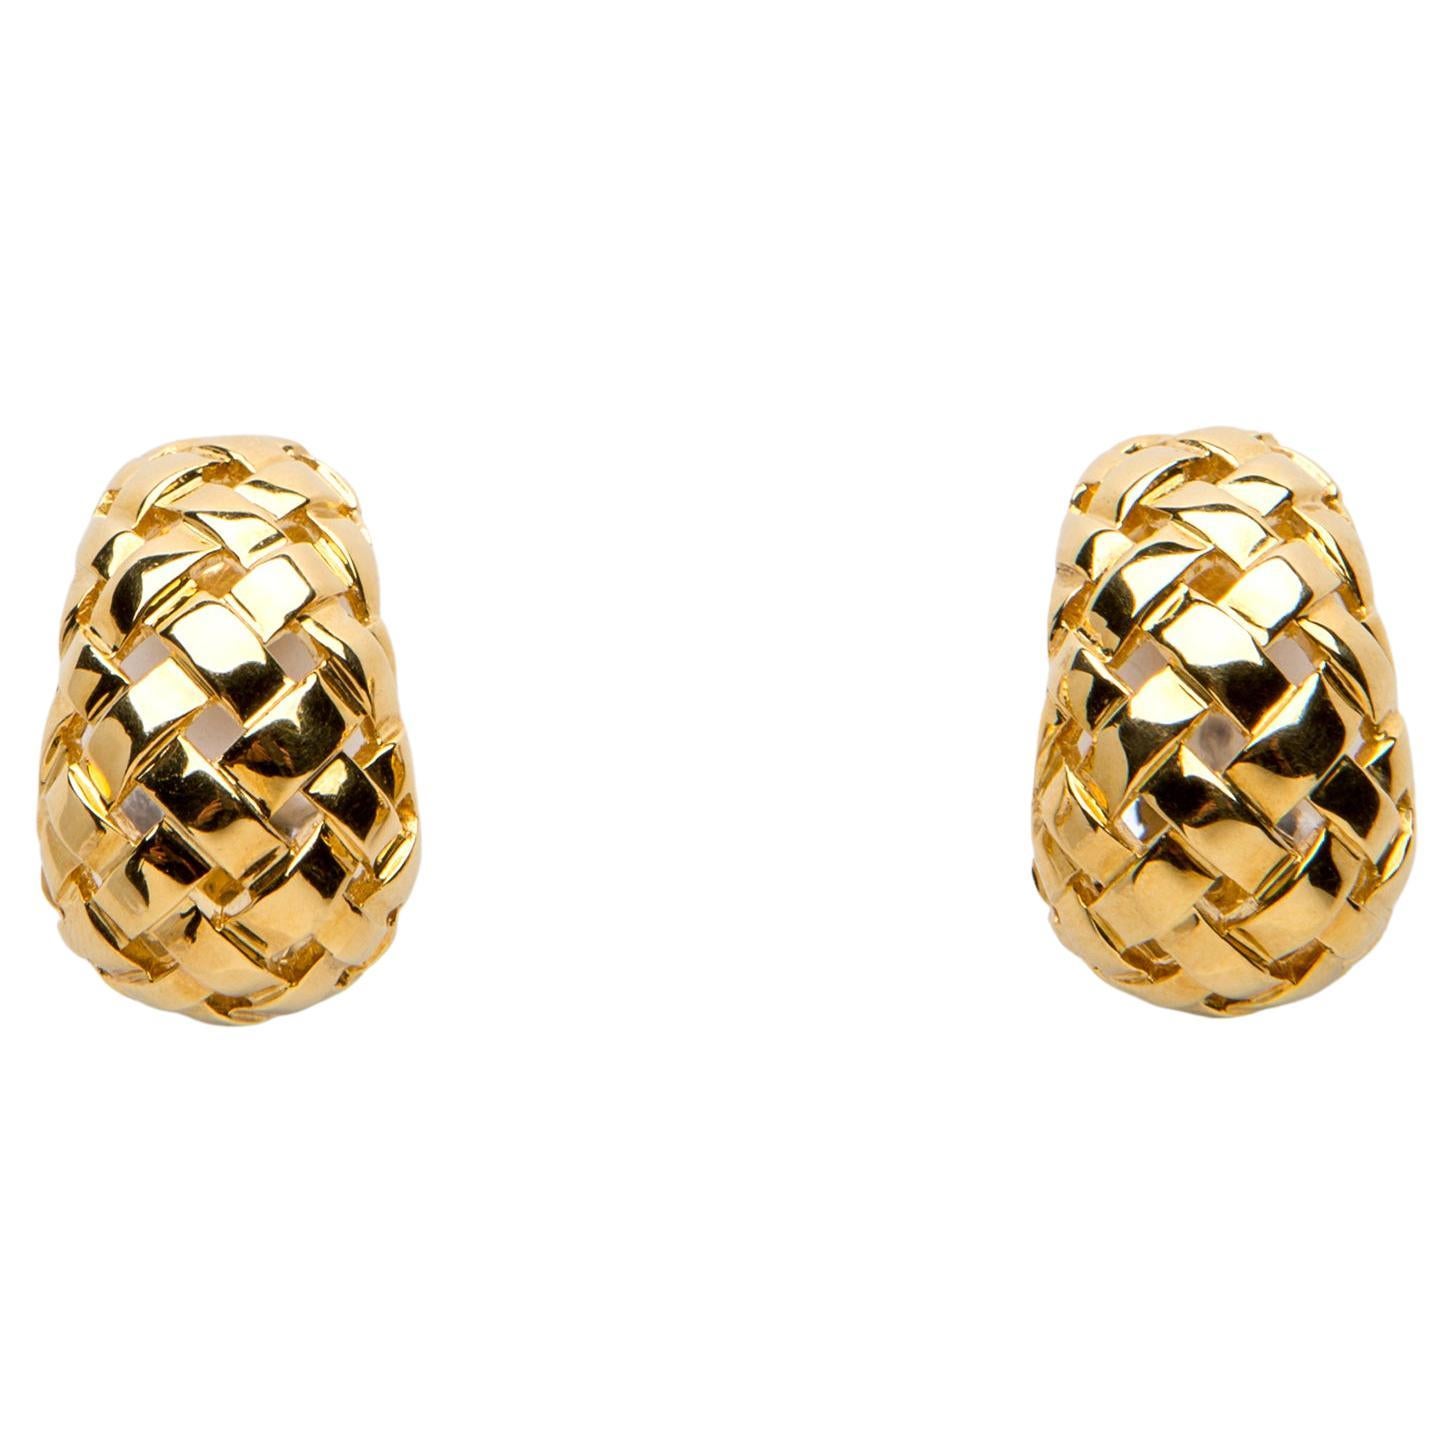 Tiffany & Co. Vannerie Collection Gold Earrings